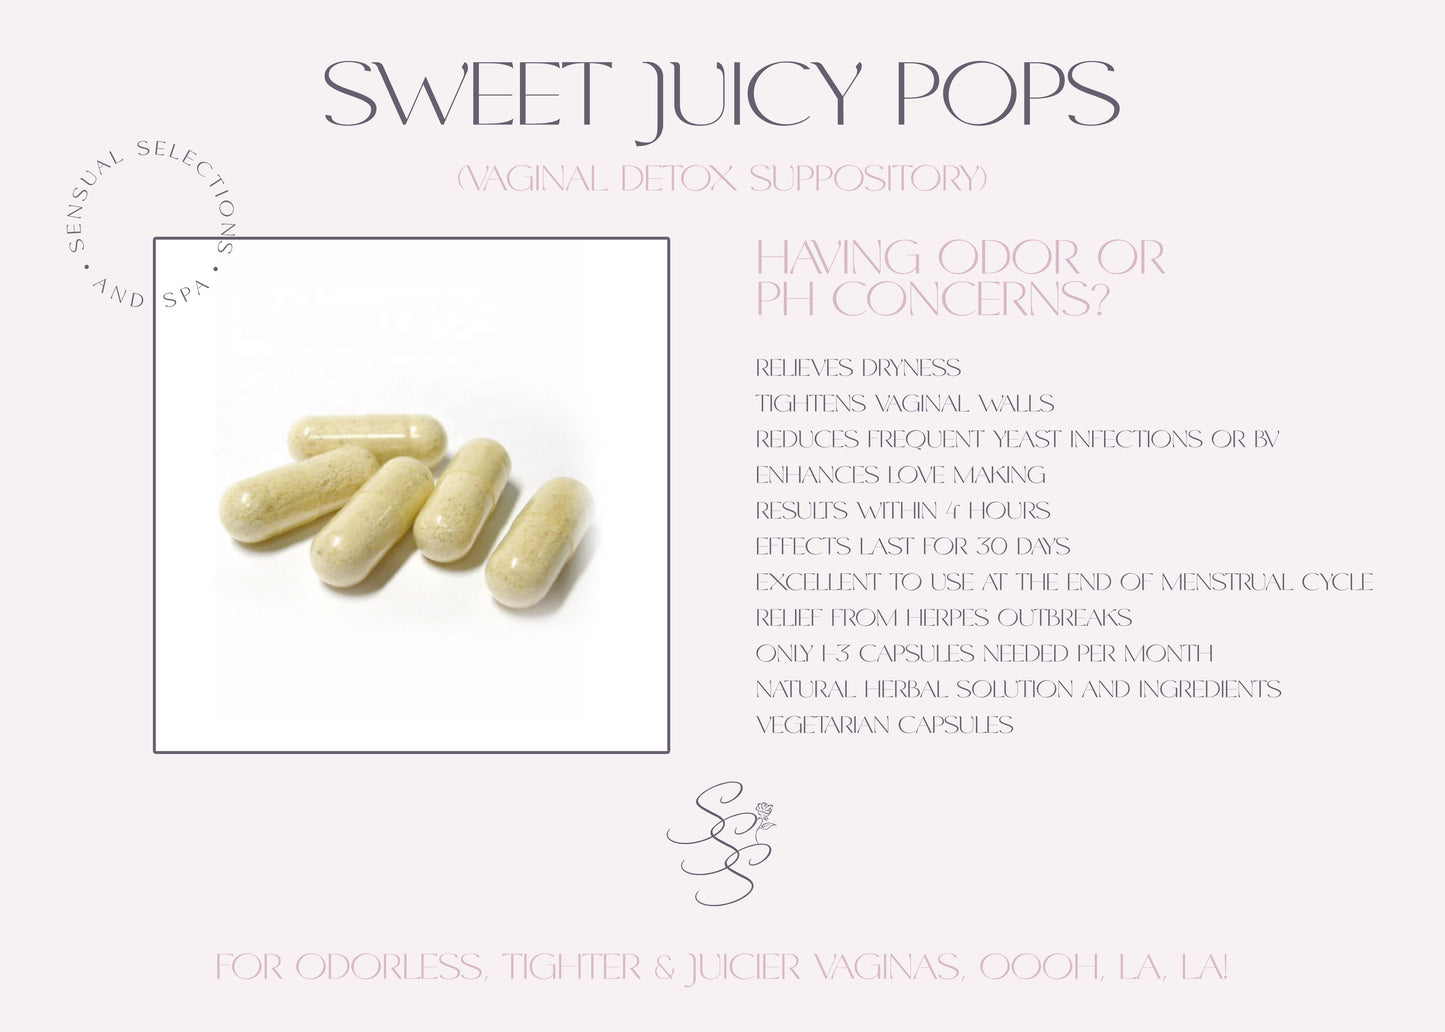 Sweet Juicy Pops (Yoni Suppository)